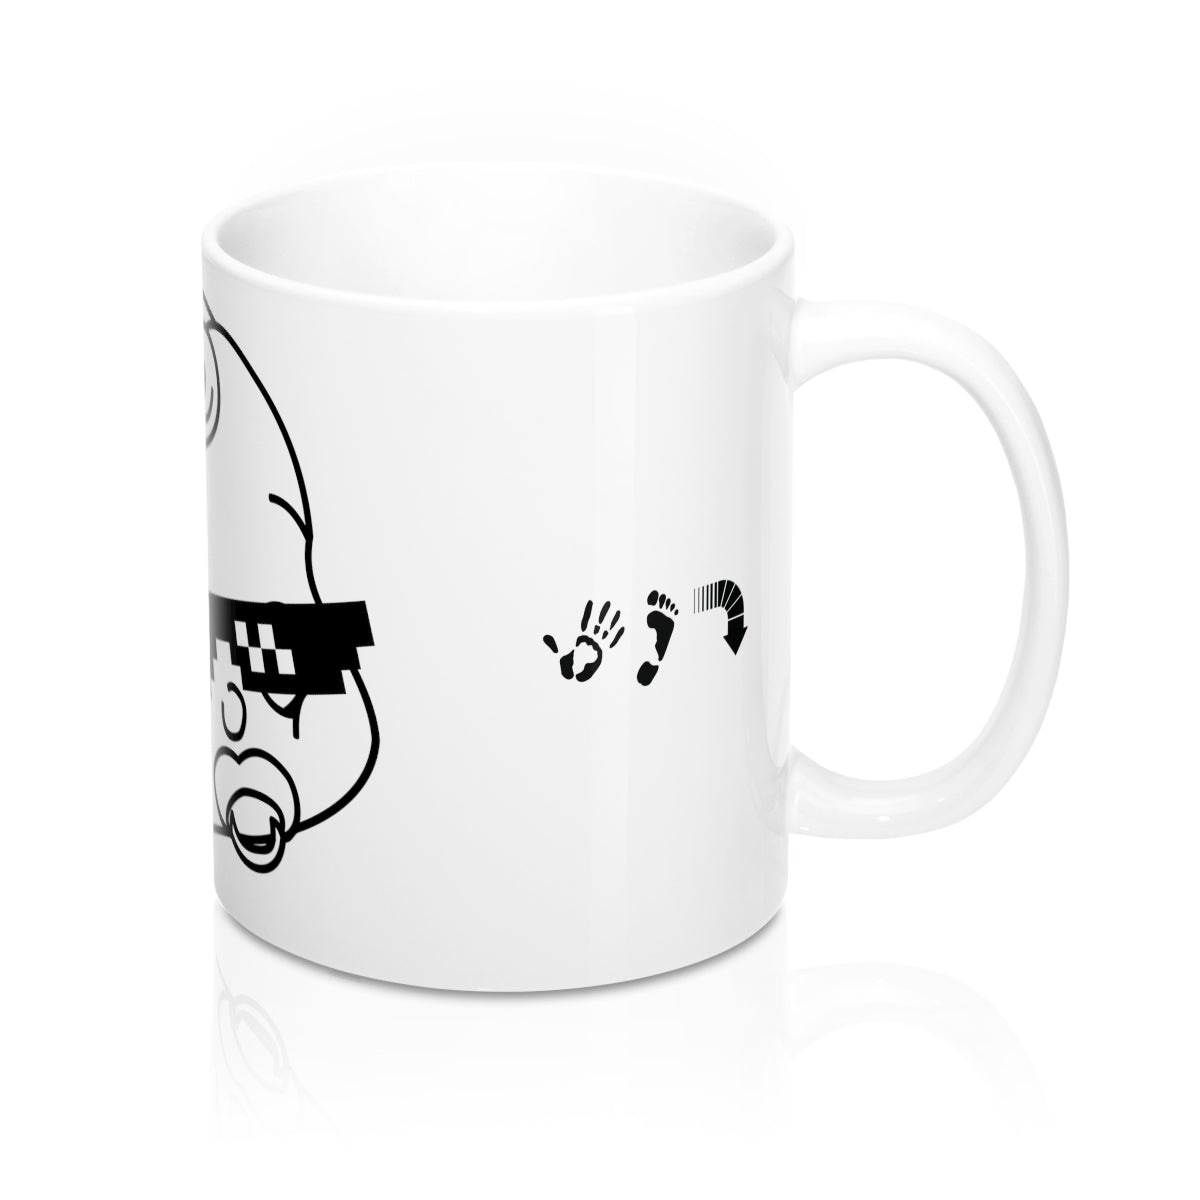 Five Toes Down Cool Baby Mugs